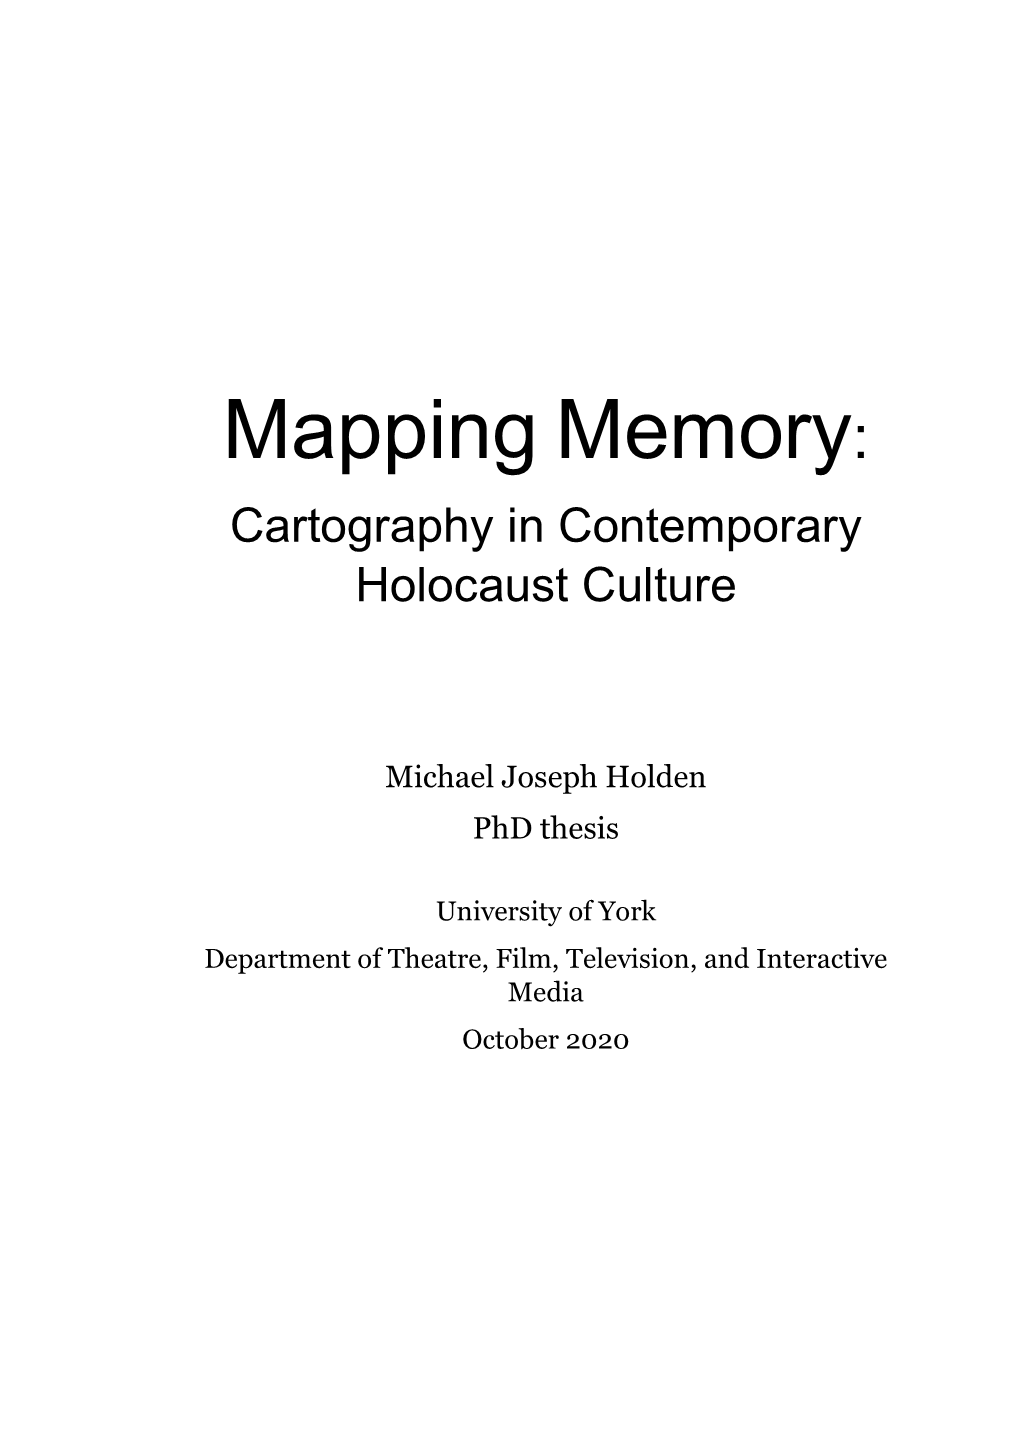 Mapping Memory: Cartography in Contemporary Holocaust Culture